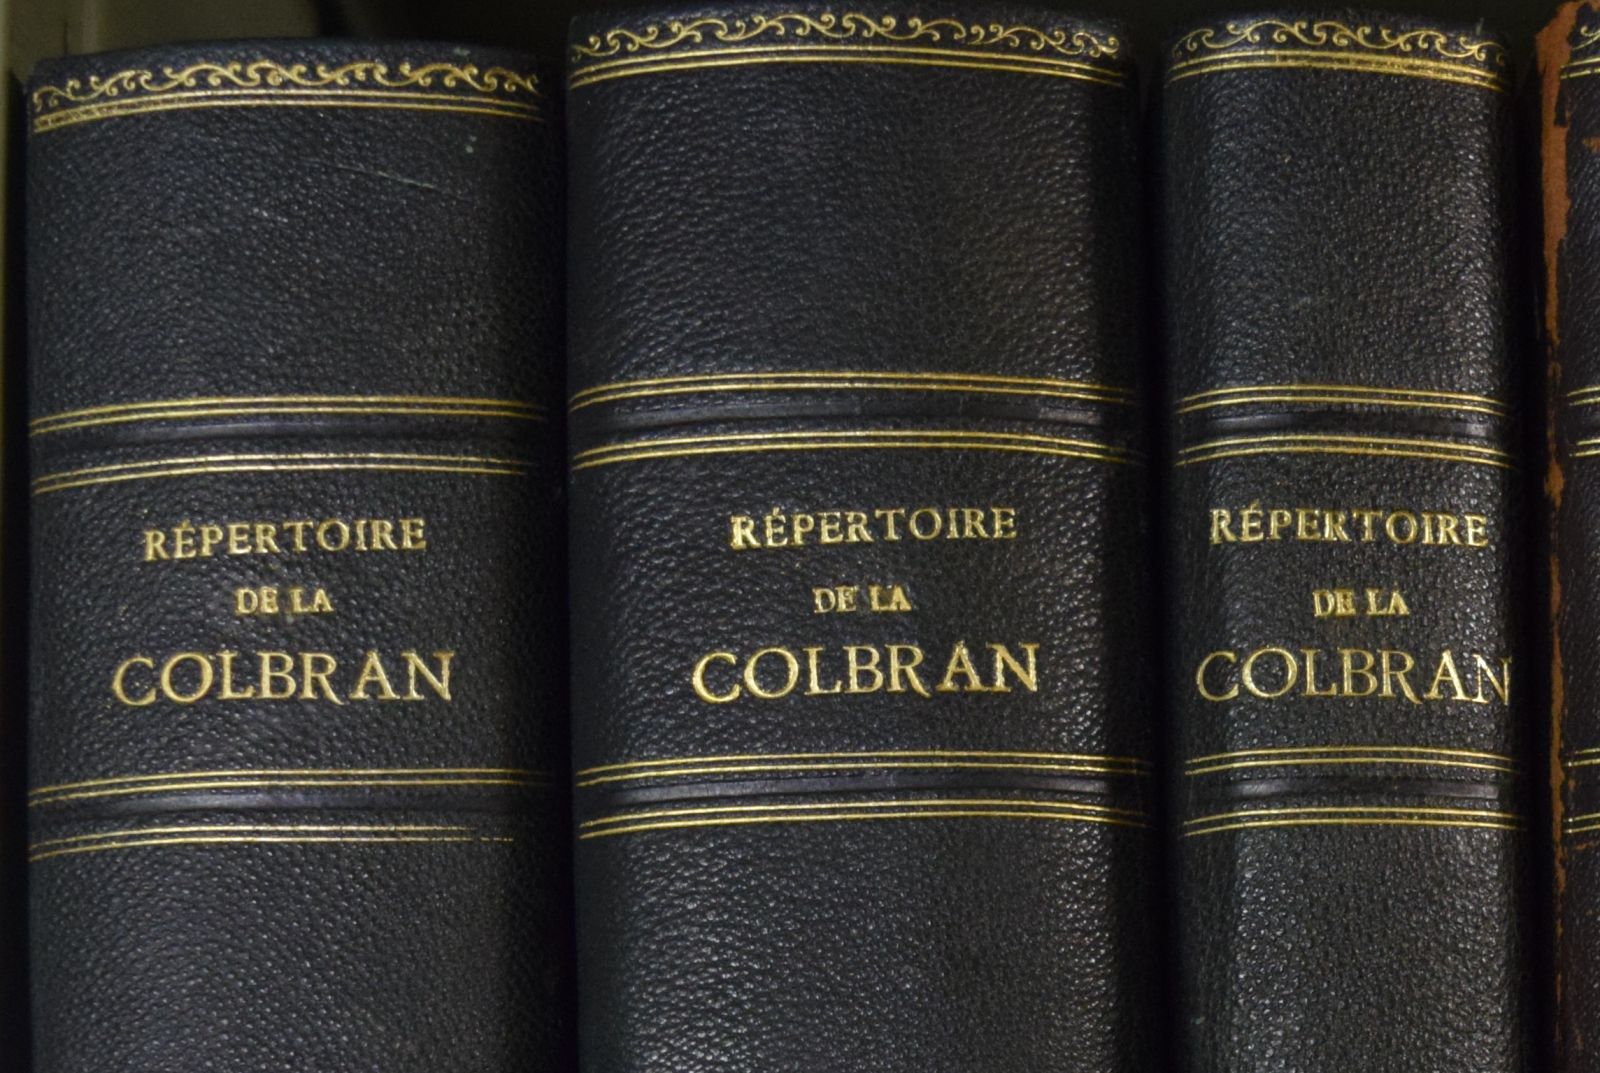 The ‘Répertoire de la Colbran’, scores from the 18th and 19th century, bound in 1911.